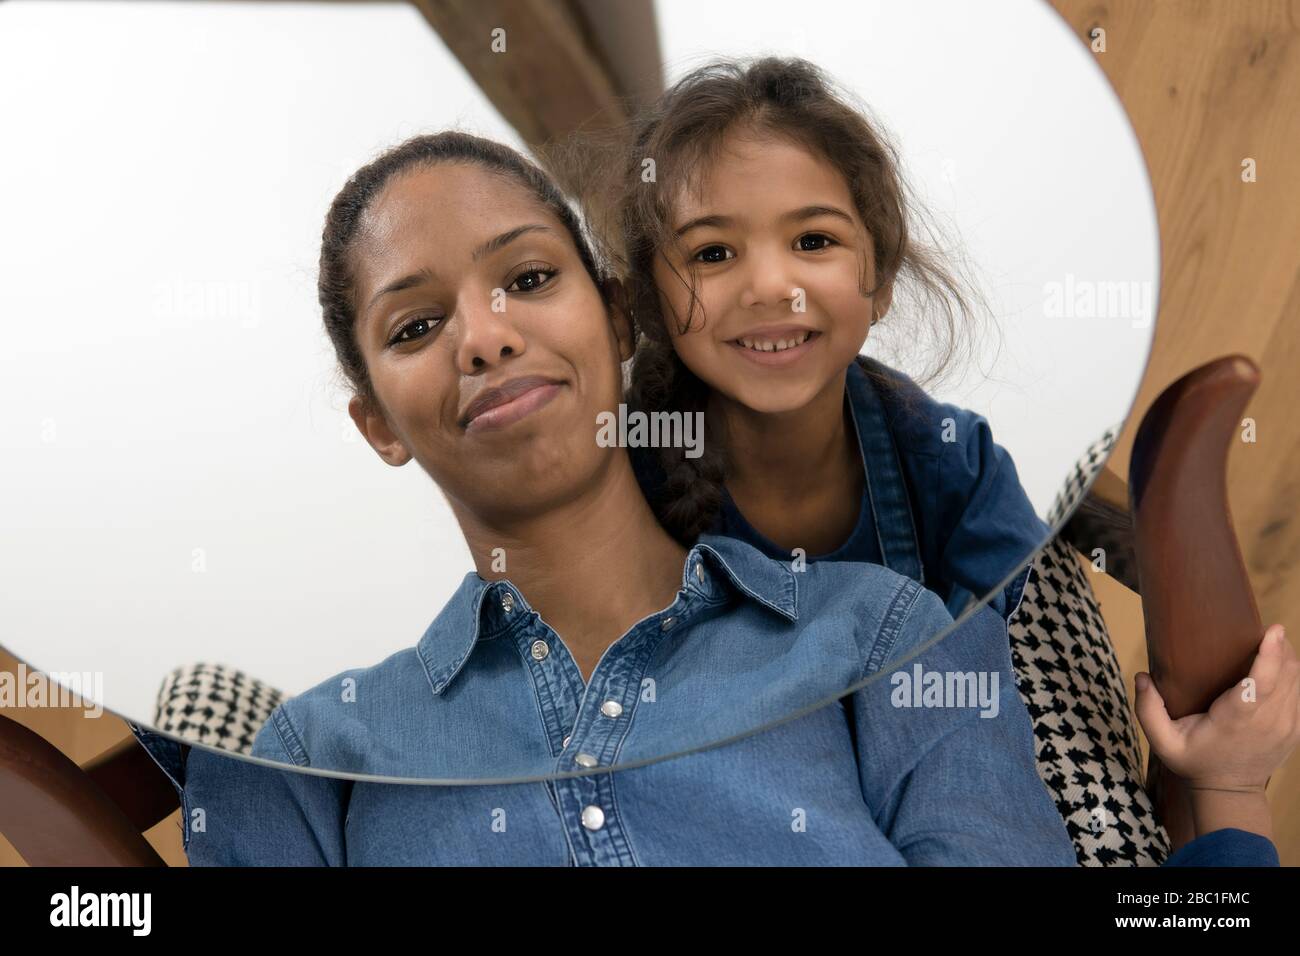 Mirror image of smiling mother and her happy little daughter Stock Photo